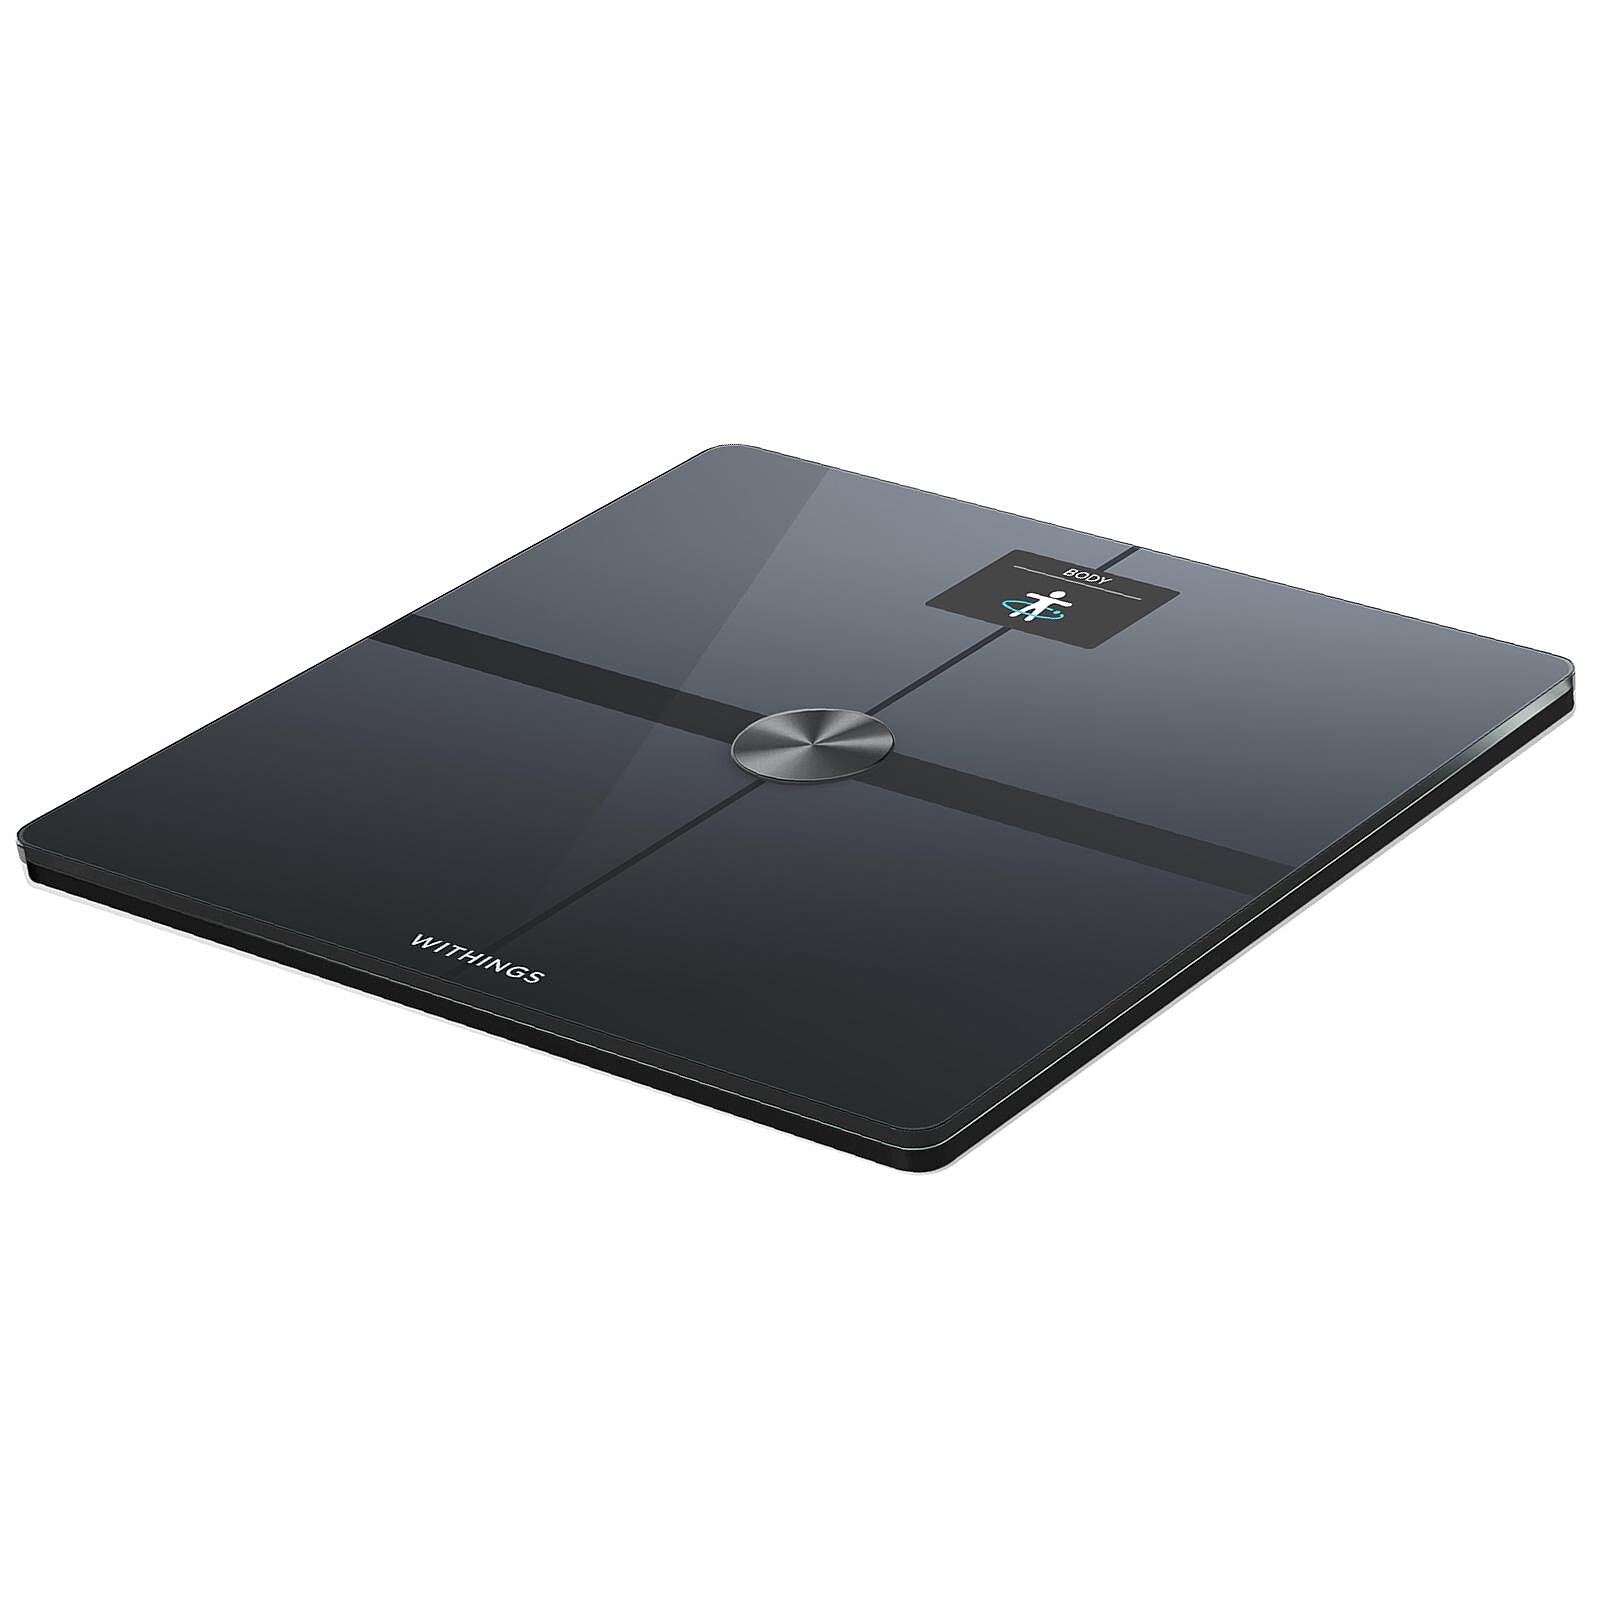 Withings Body ou Withings Body Cardio : notre avis sur les balances  connectées Withings